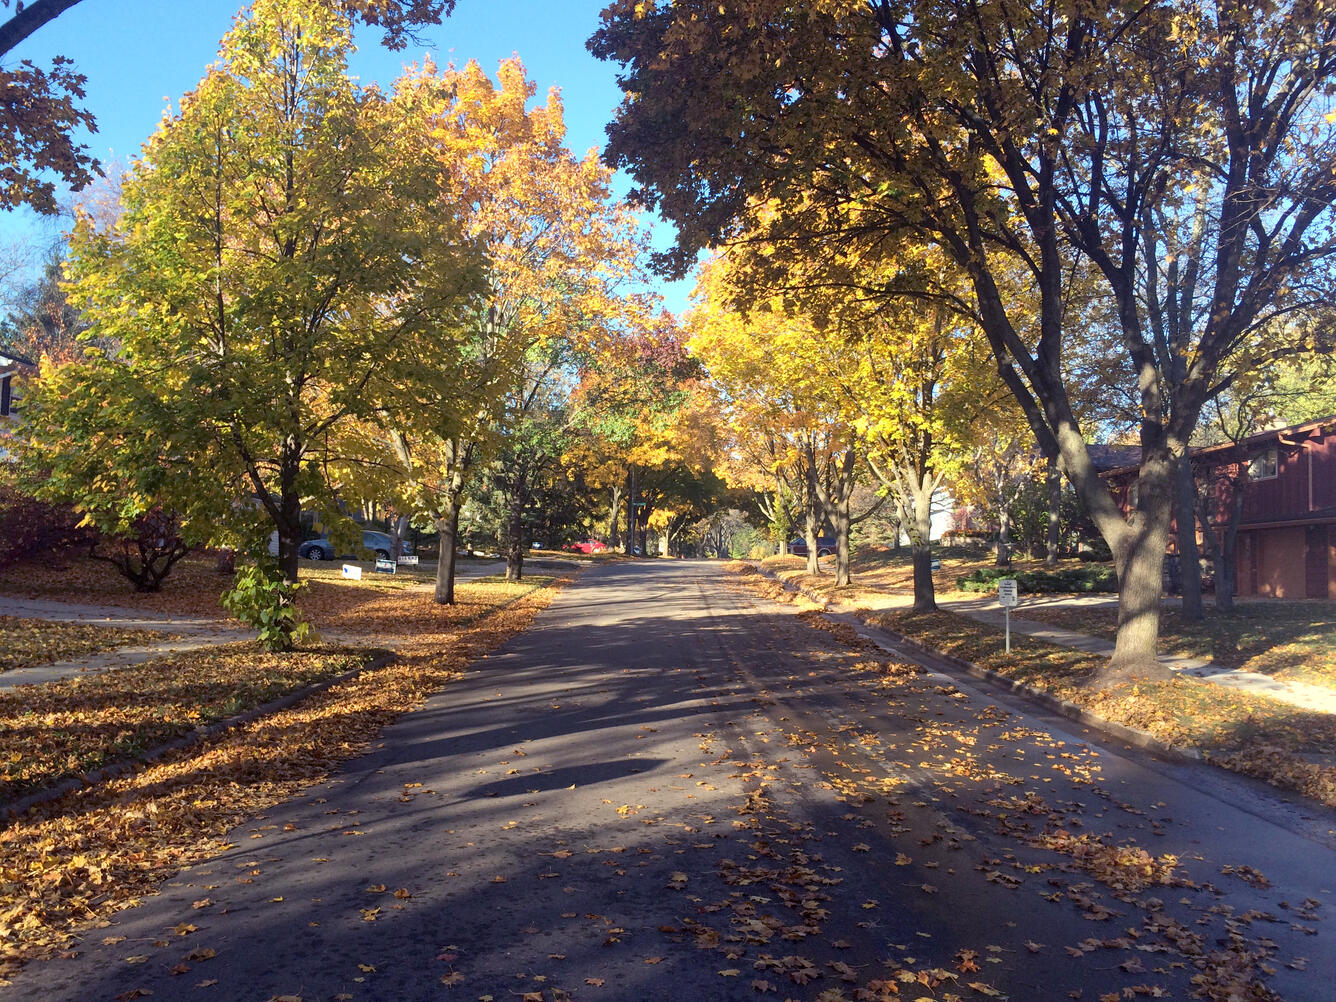 Photo of a street with fall leaves